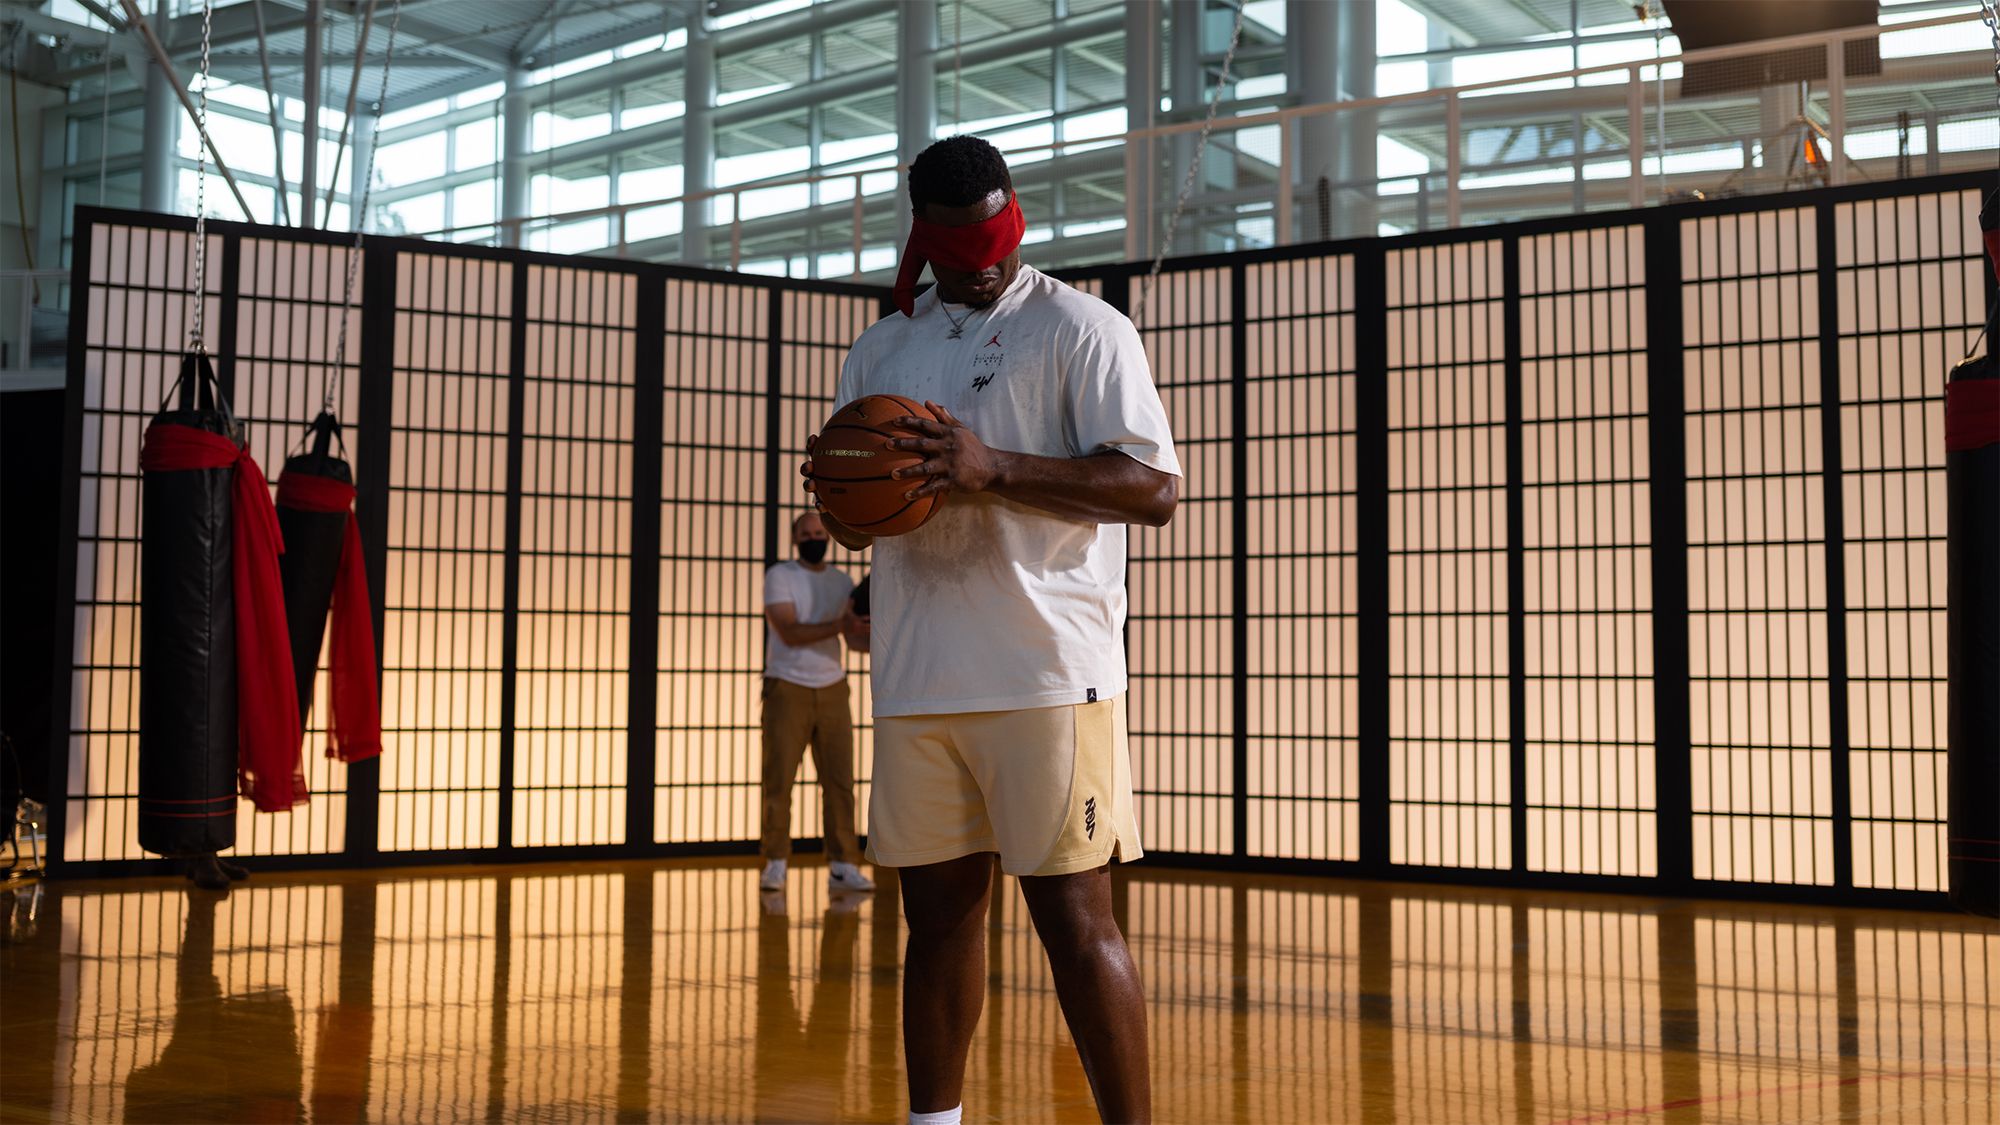 Zion holding basketball with blindfold on